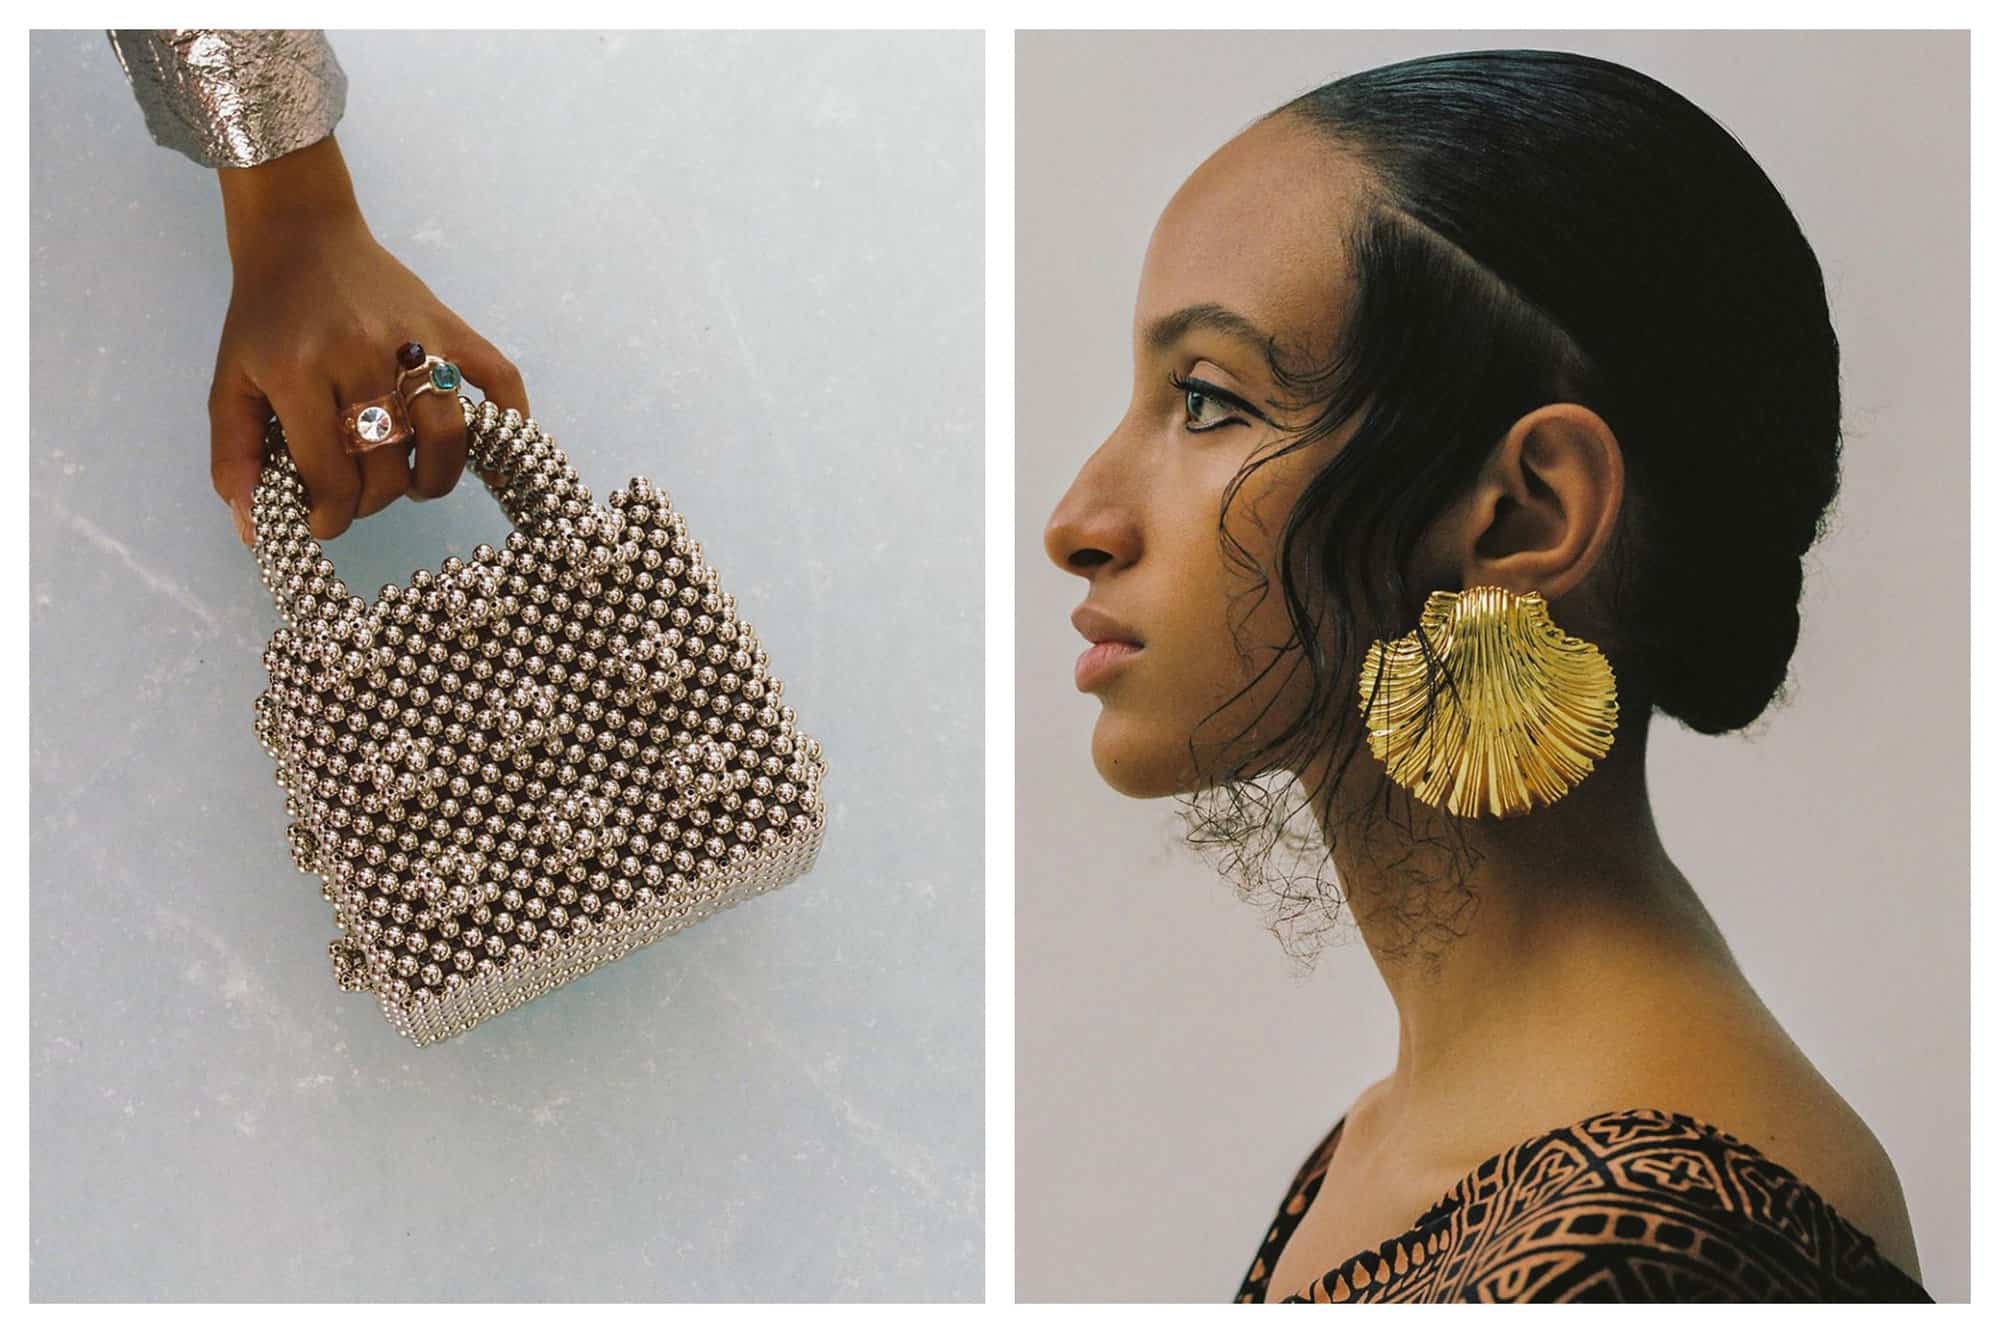 Left: A hand holds a vintage golden sequined bag. Right: A woman in modern Egyptian style wears big golden sea-shell earrings.